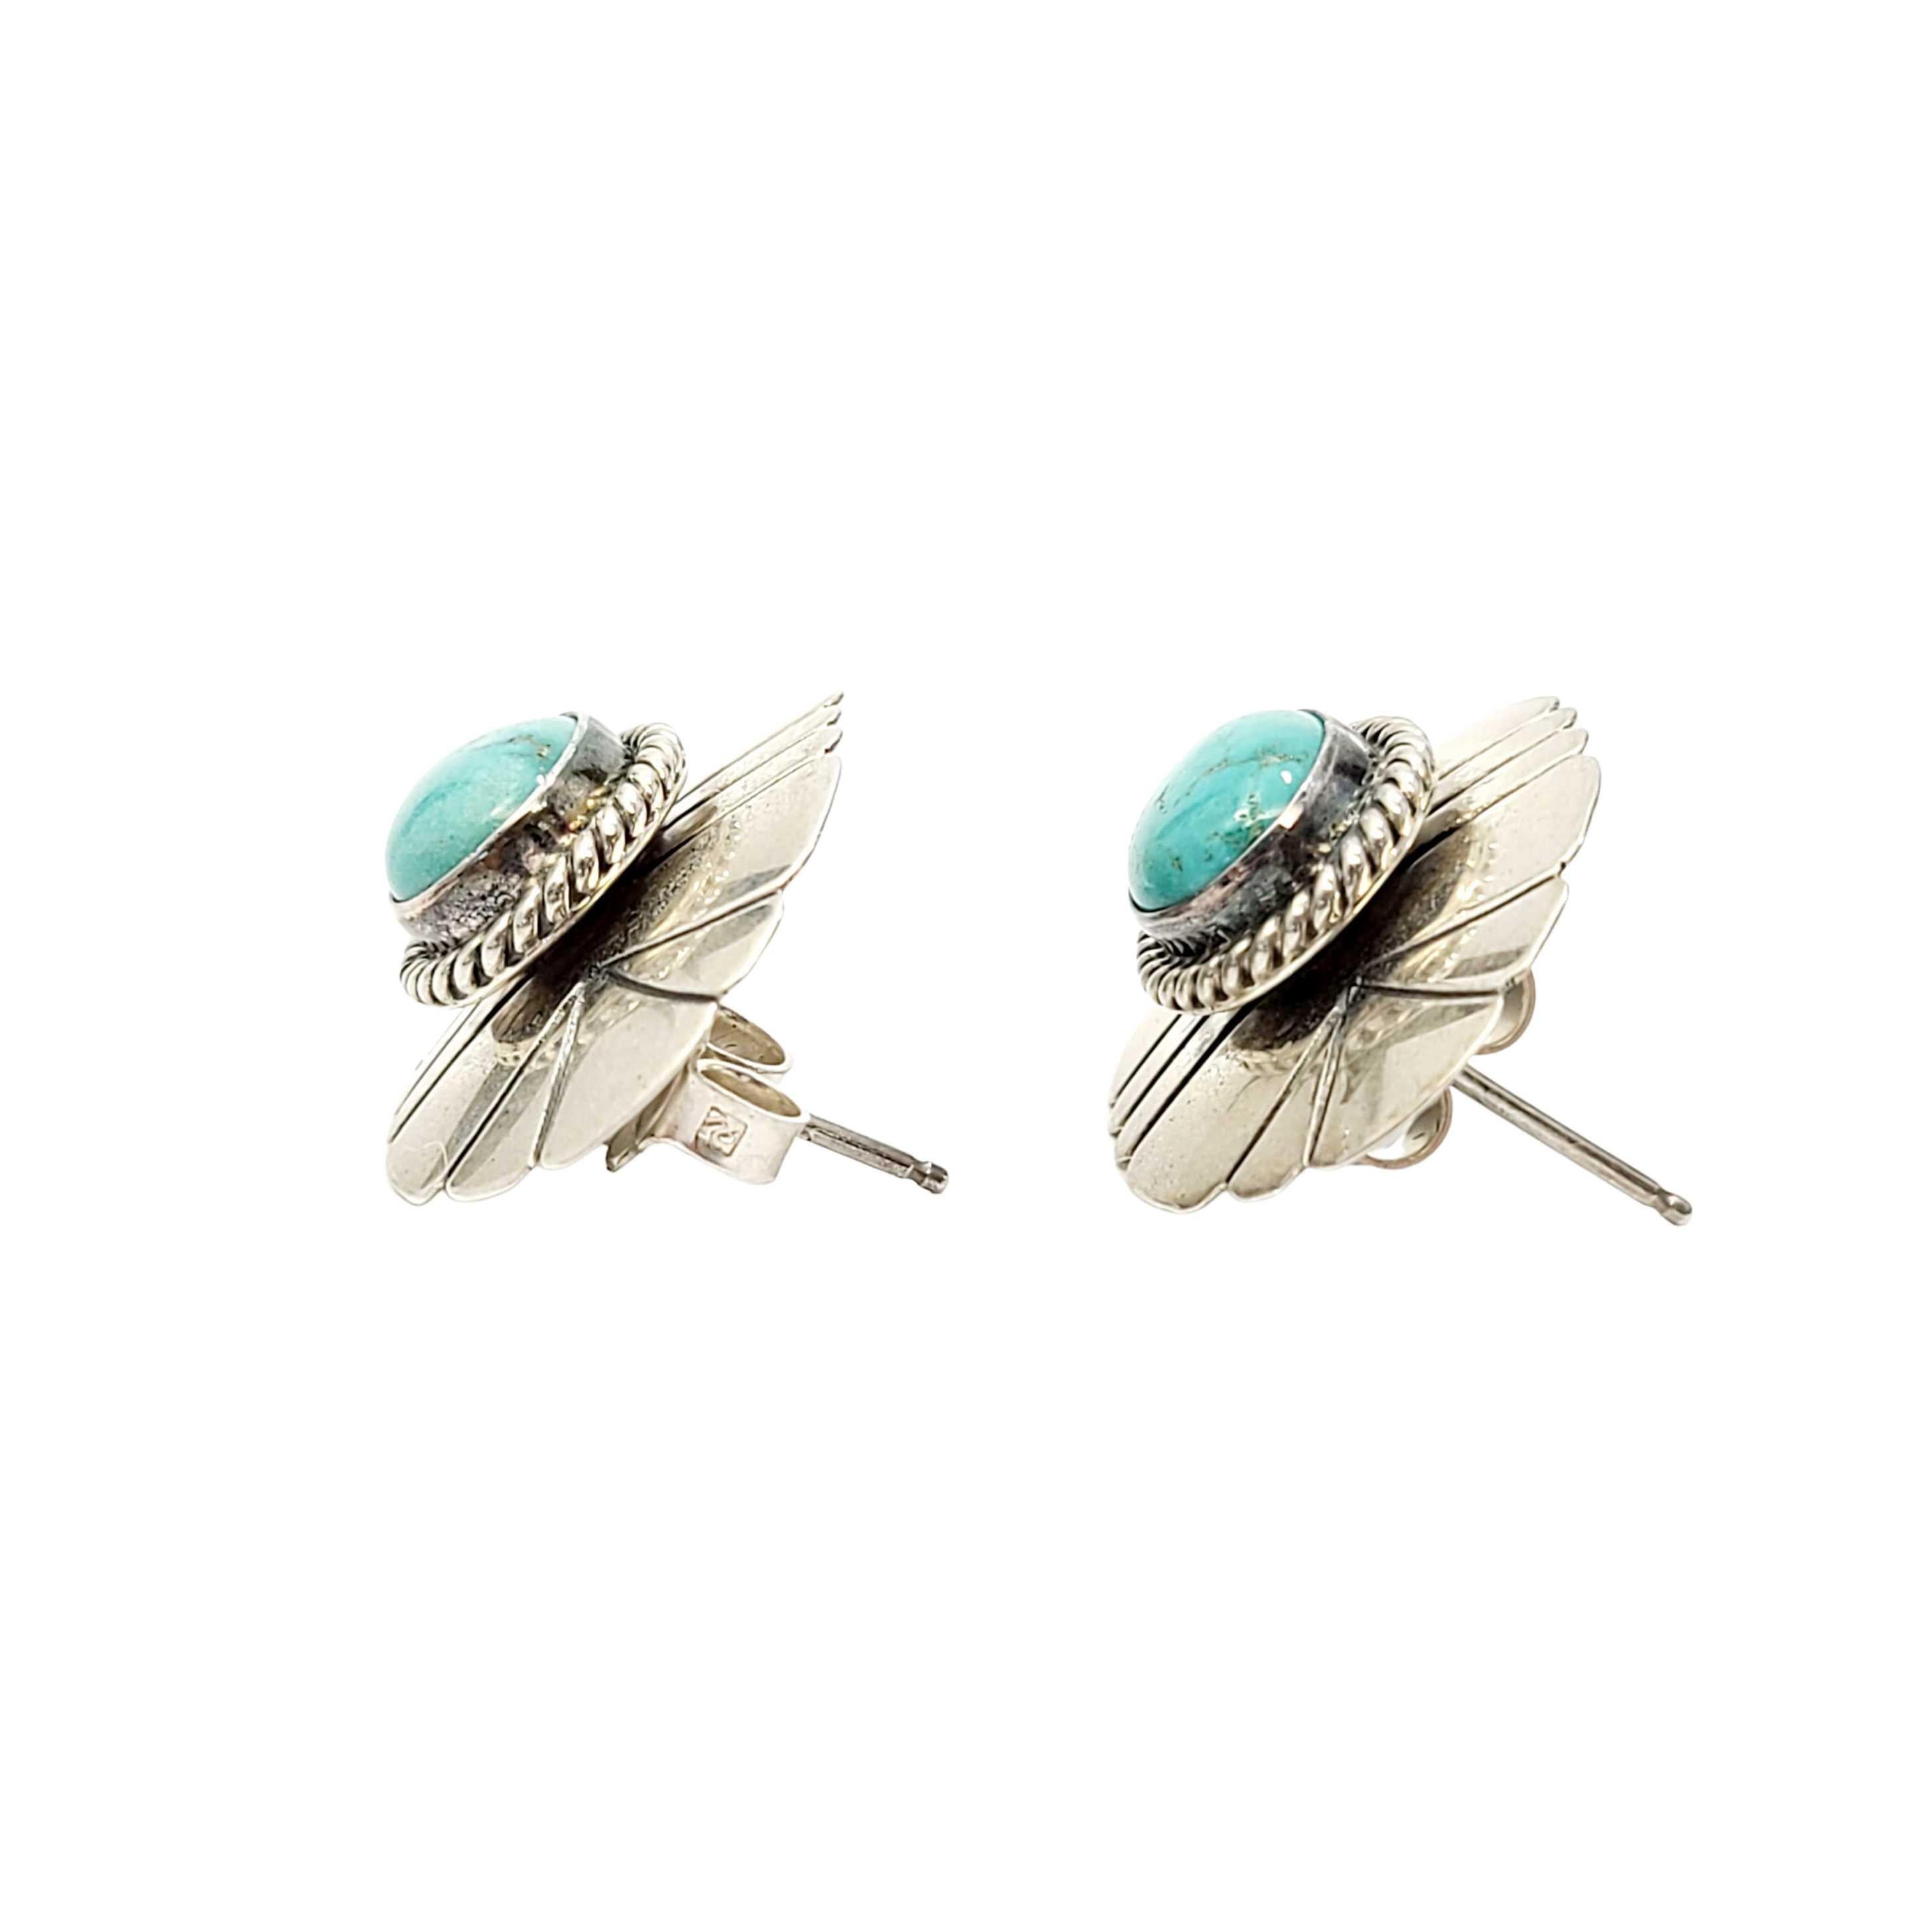 Sterling silver and turquoise earrings by Native American Navajo artisan, Artie Yellowhorse.

Artie Yellowhorse is known for her contemporary designs combined with exceptional craftsmanship and quality materials. Her pieces are truly wearable art.